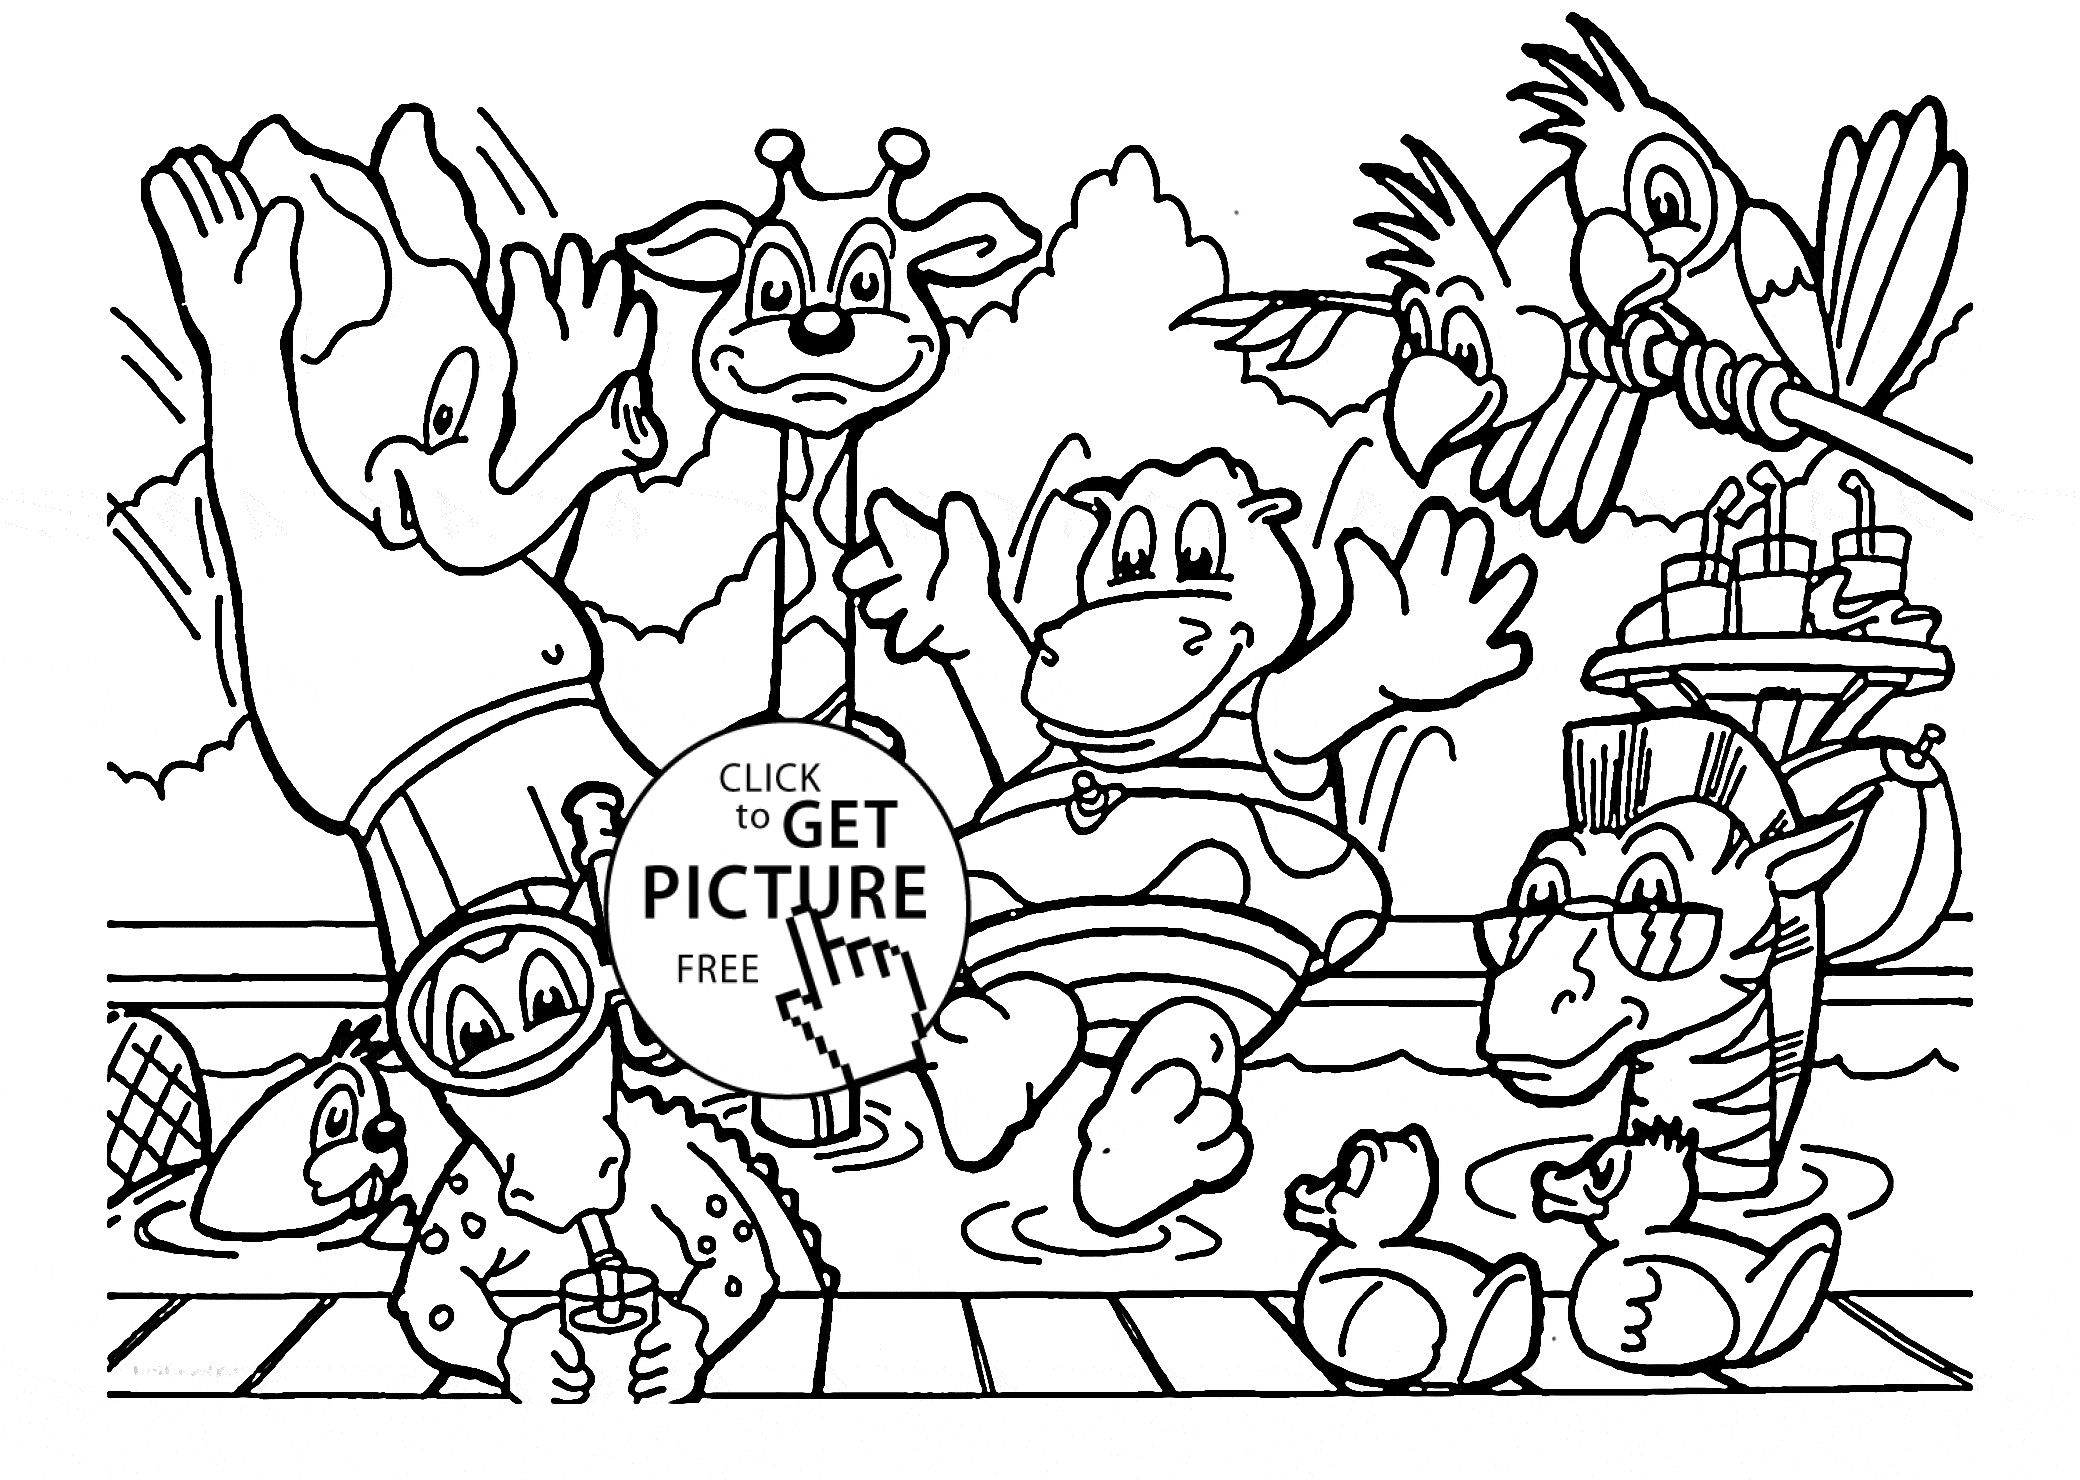 Zoo Coloring Sheets For Kids
 Zoo Animals coloring page for kids animal coloring pages